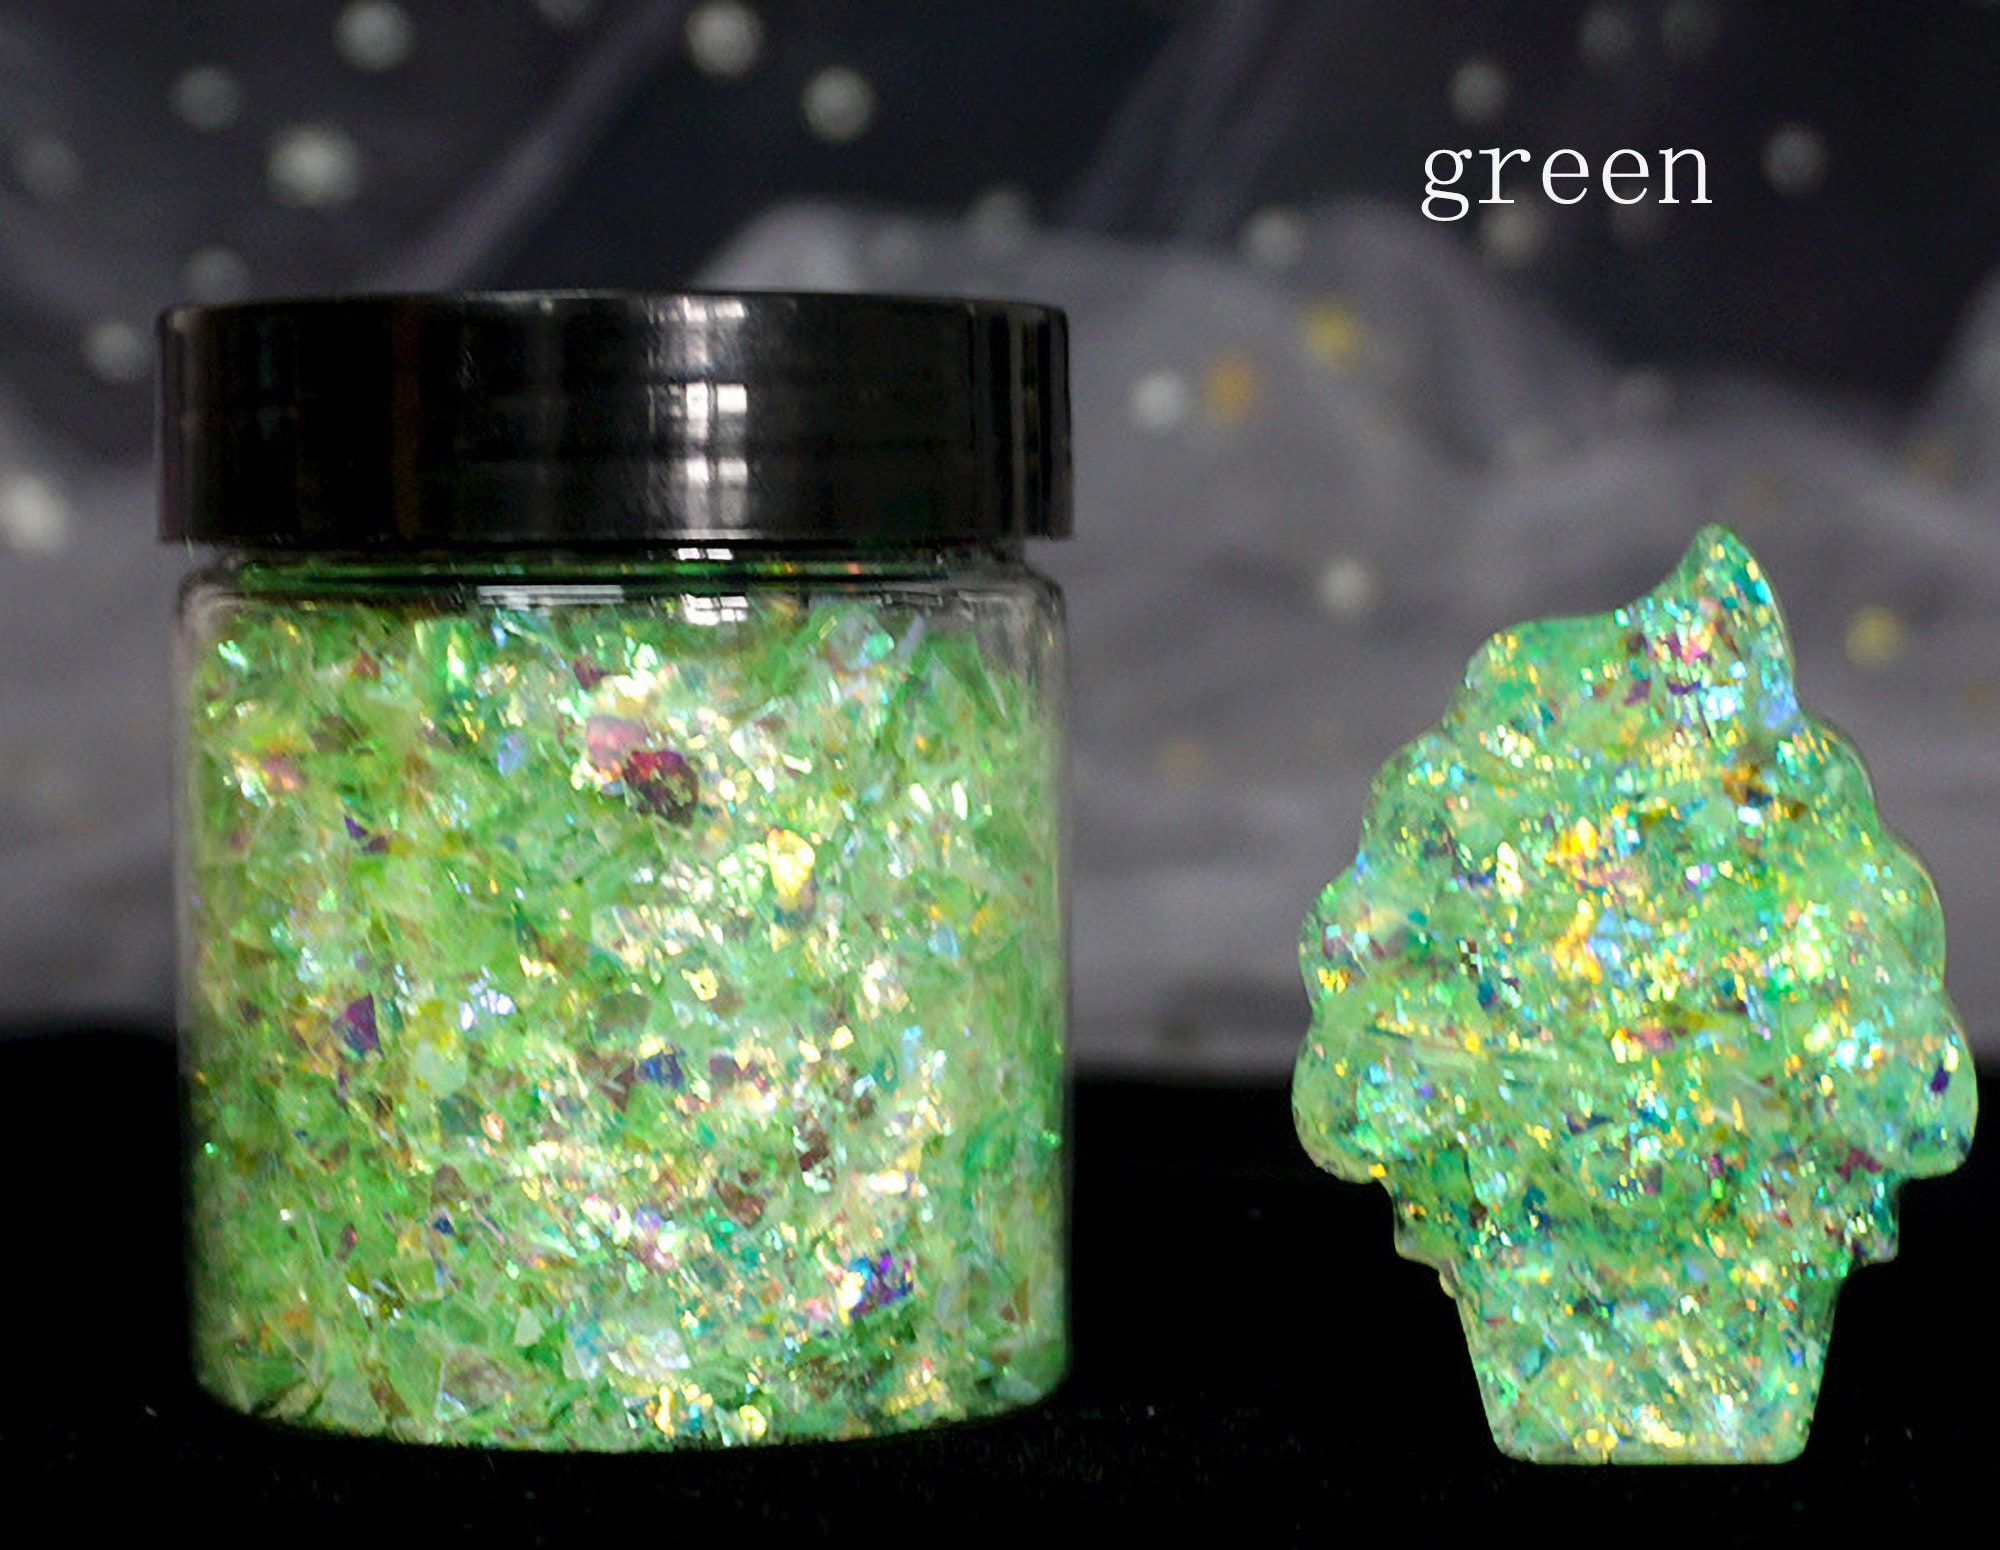 12 shapes glitter for Resin Epoxy crafts and nail art